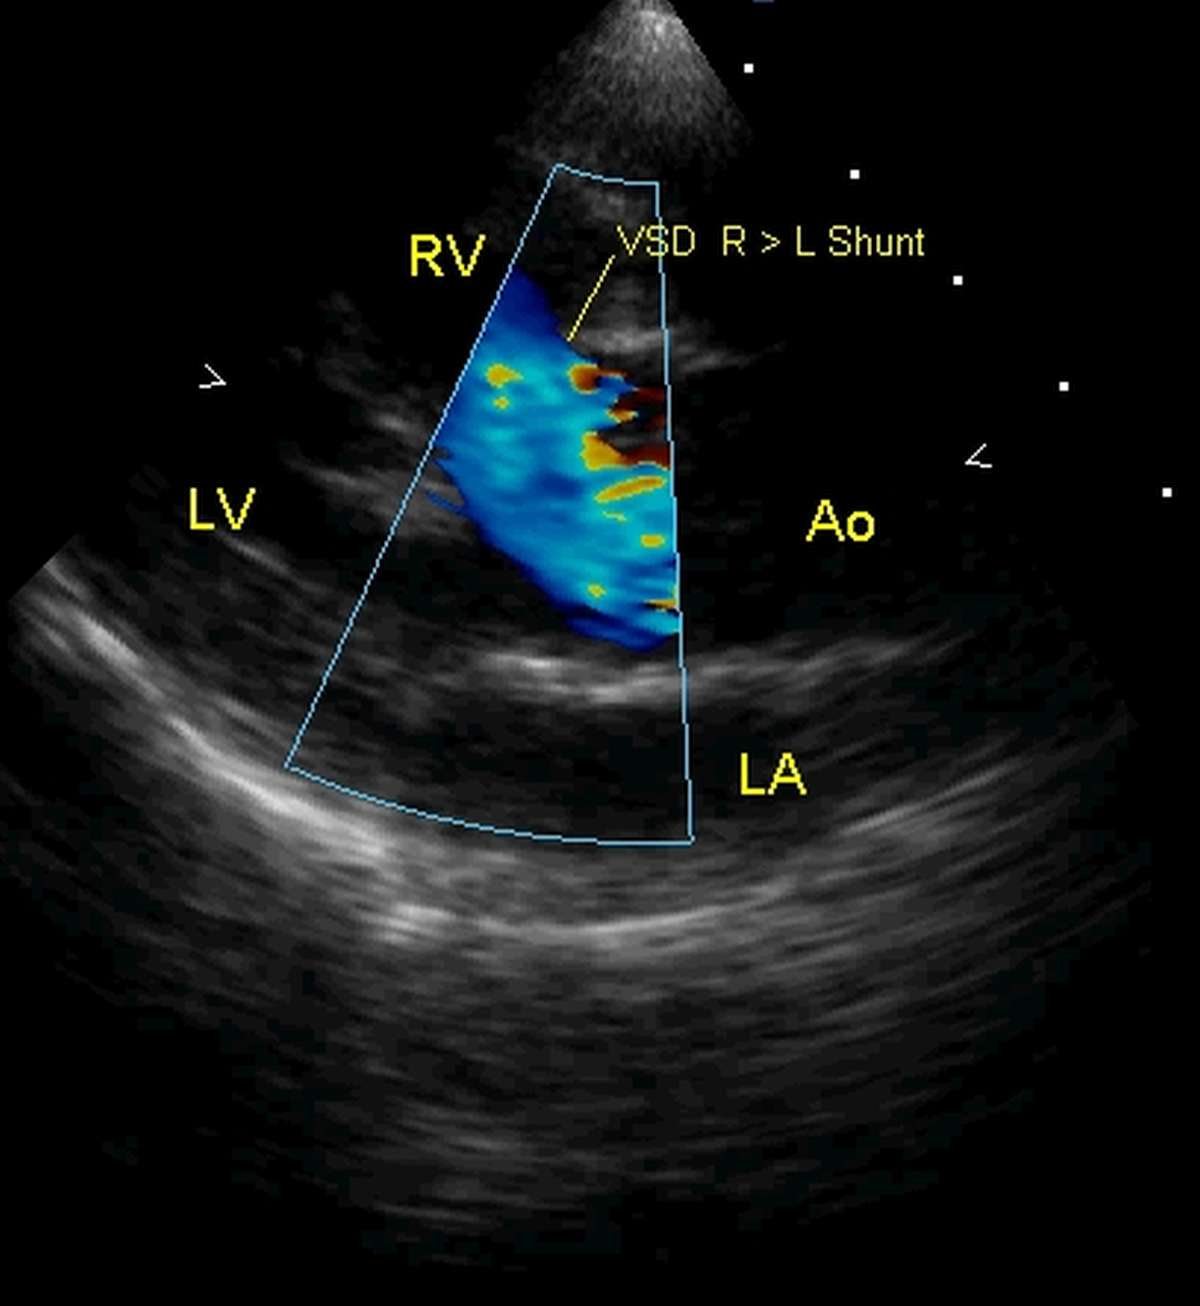 Tetralogy of Fallot with right to left shunt across the ventricular septal defect